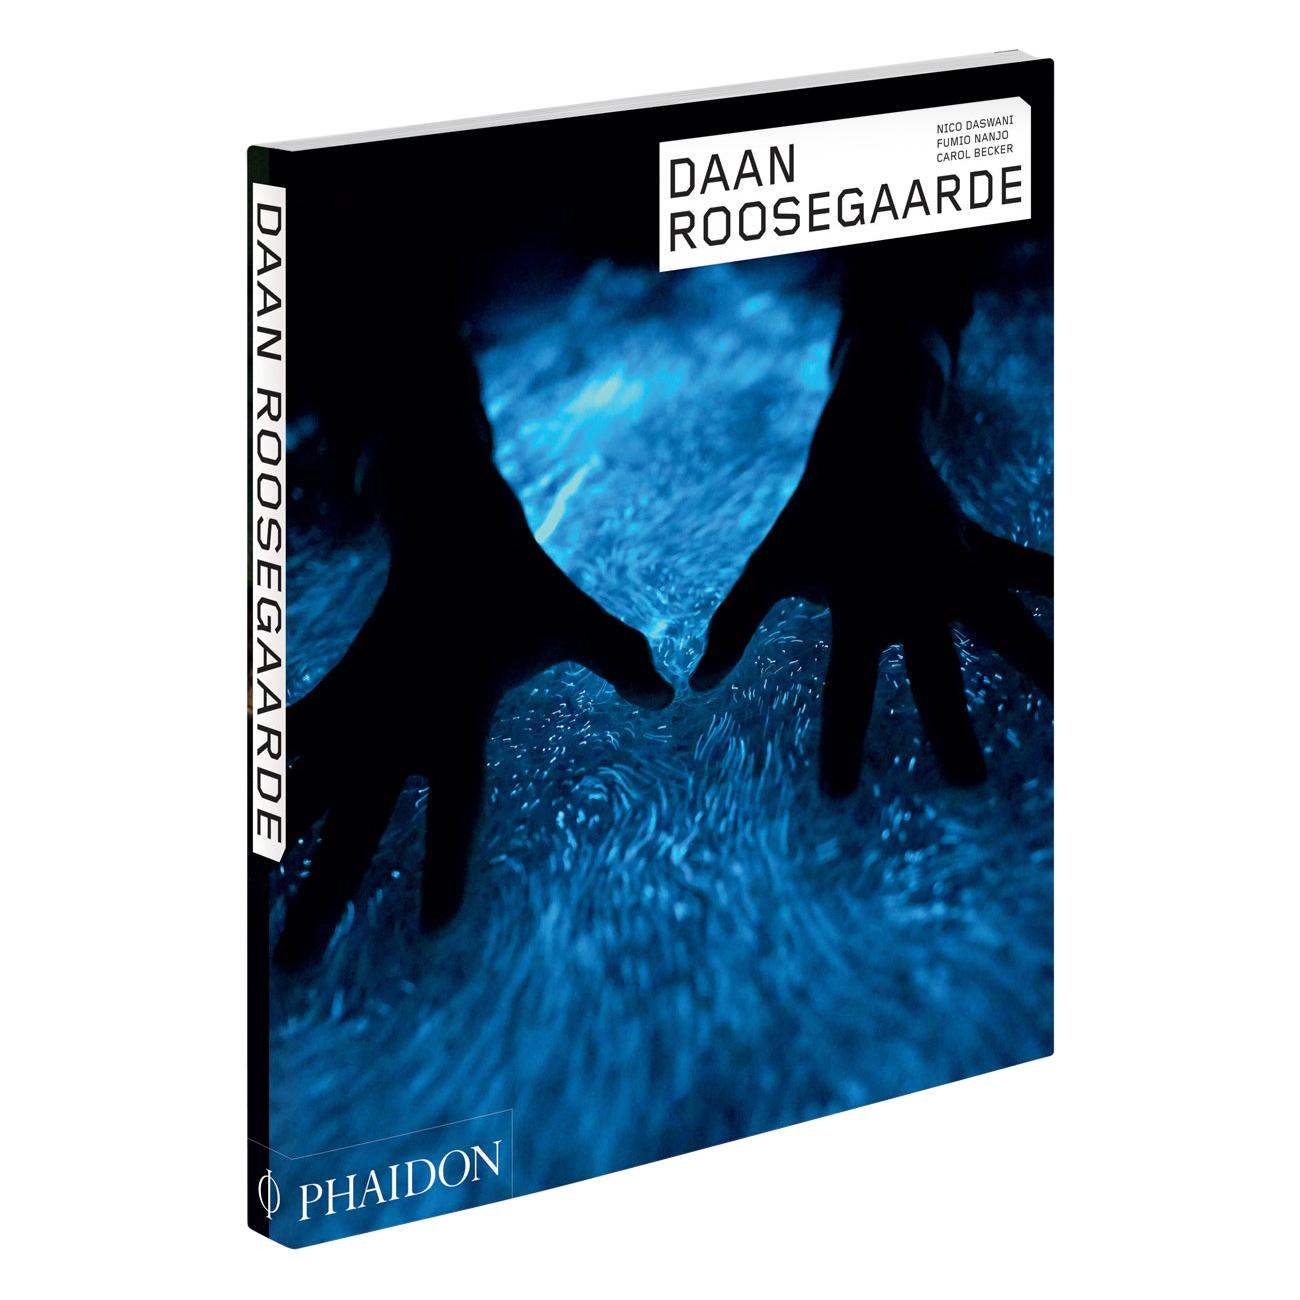 Daan Roosegaarde 'Phaidon Contemporary Artists Series' For Sale